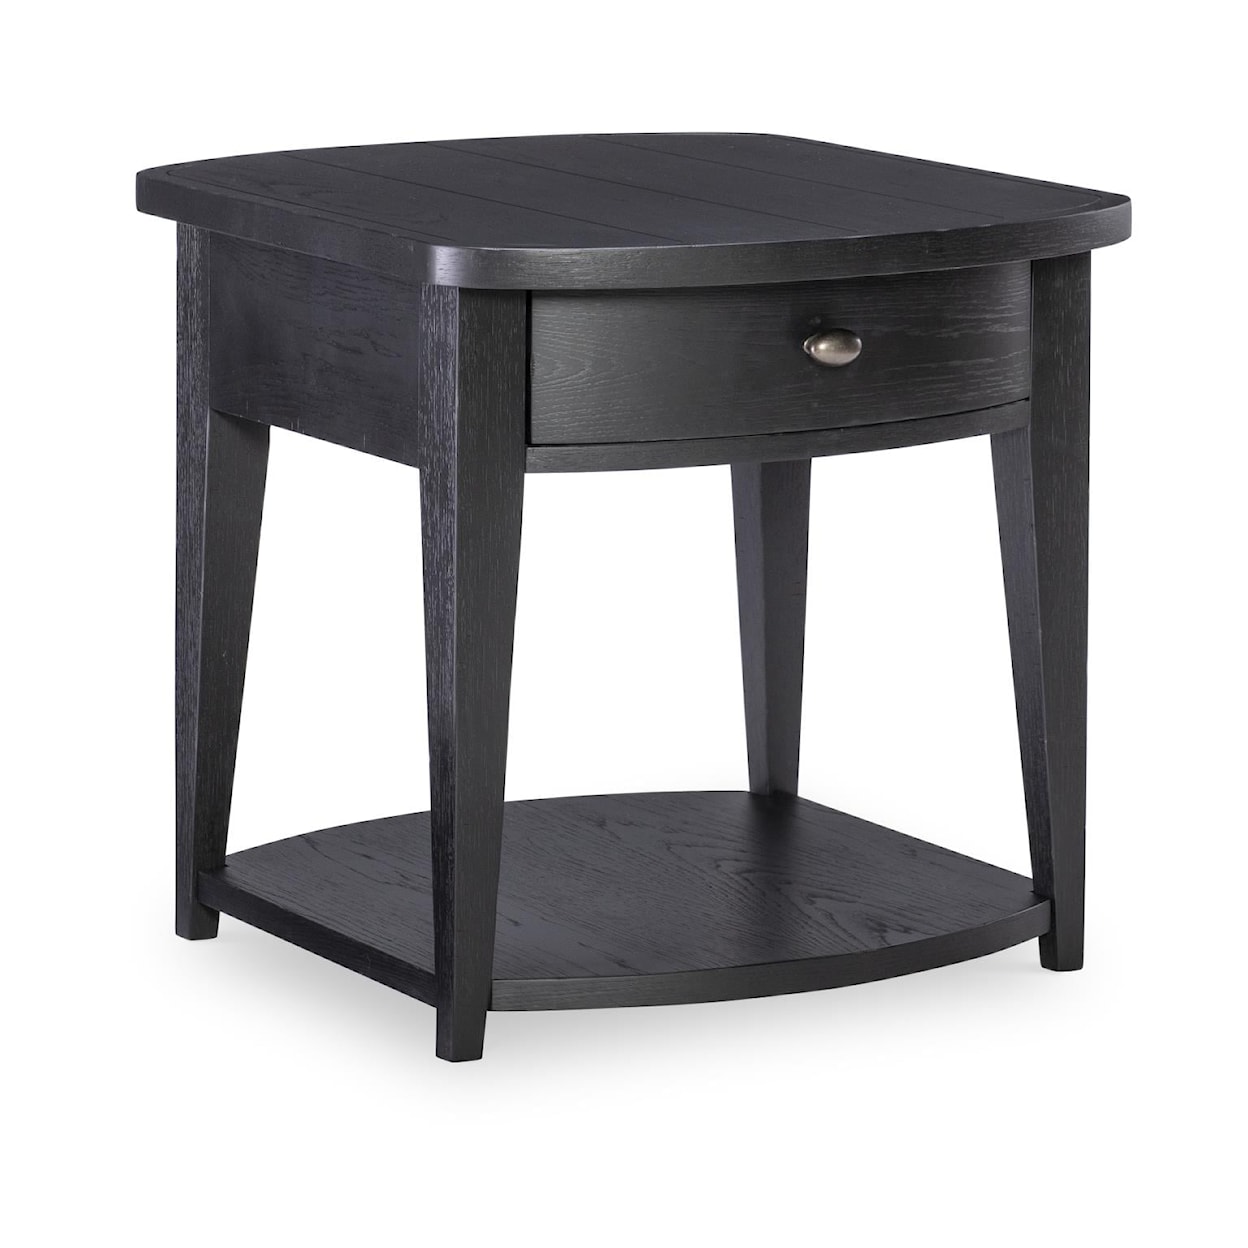 Trisha Yearwood Home Collection by Legacy Classic Today's Traditions Drawer End Table